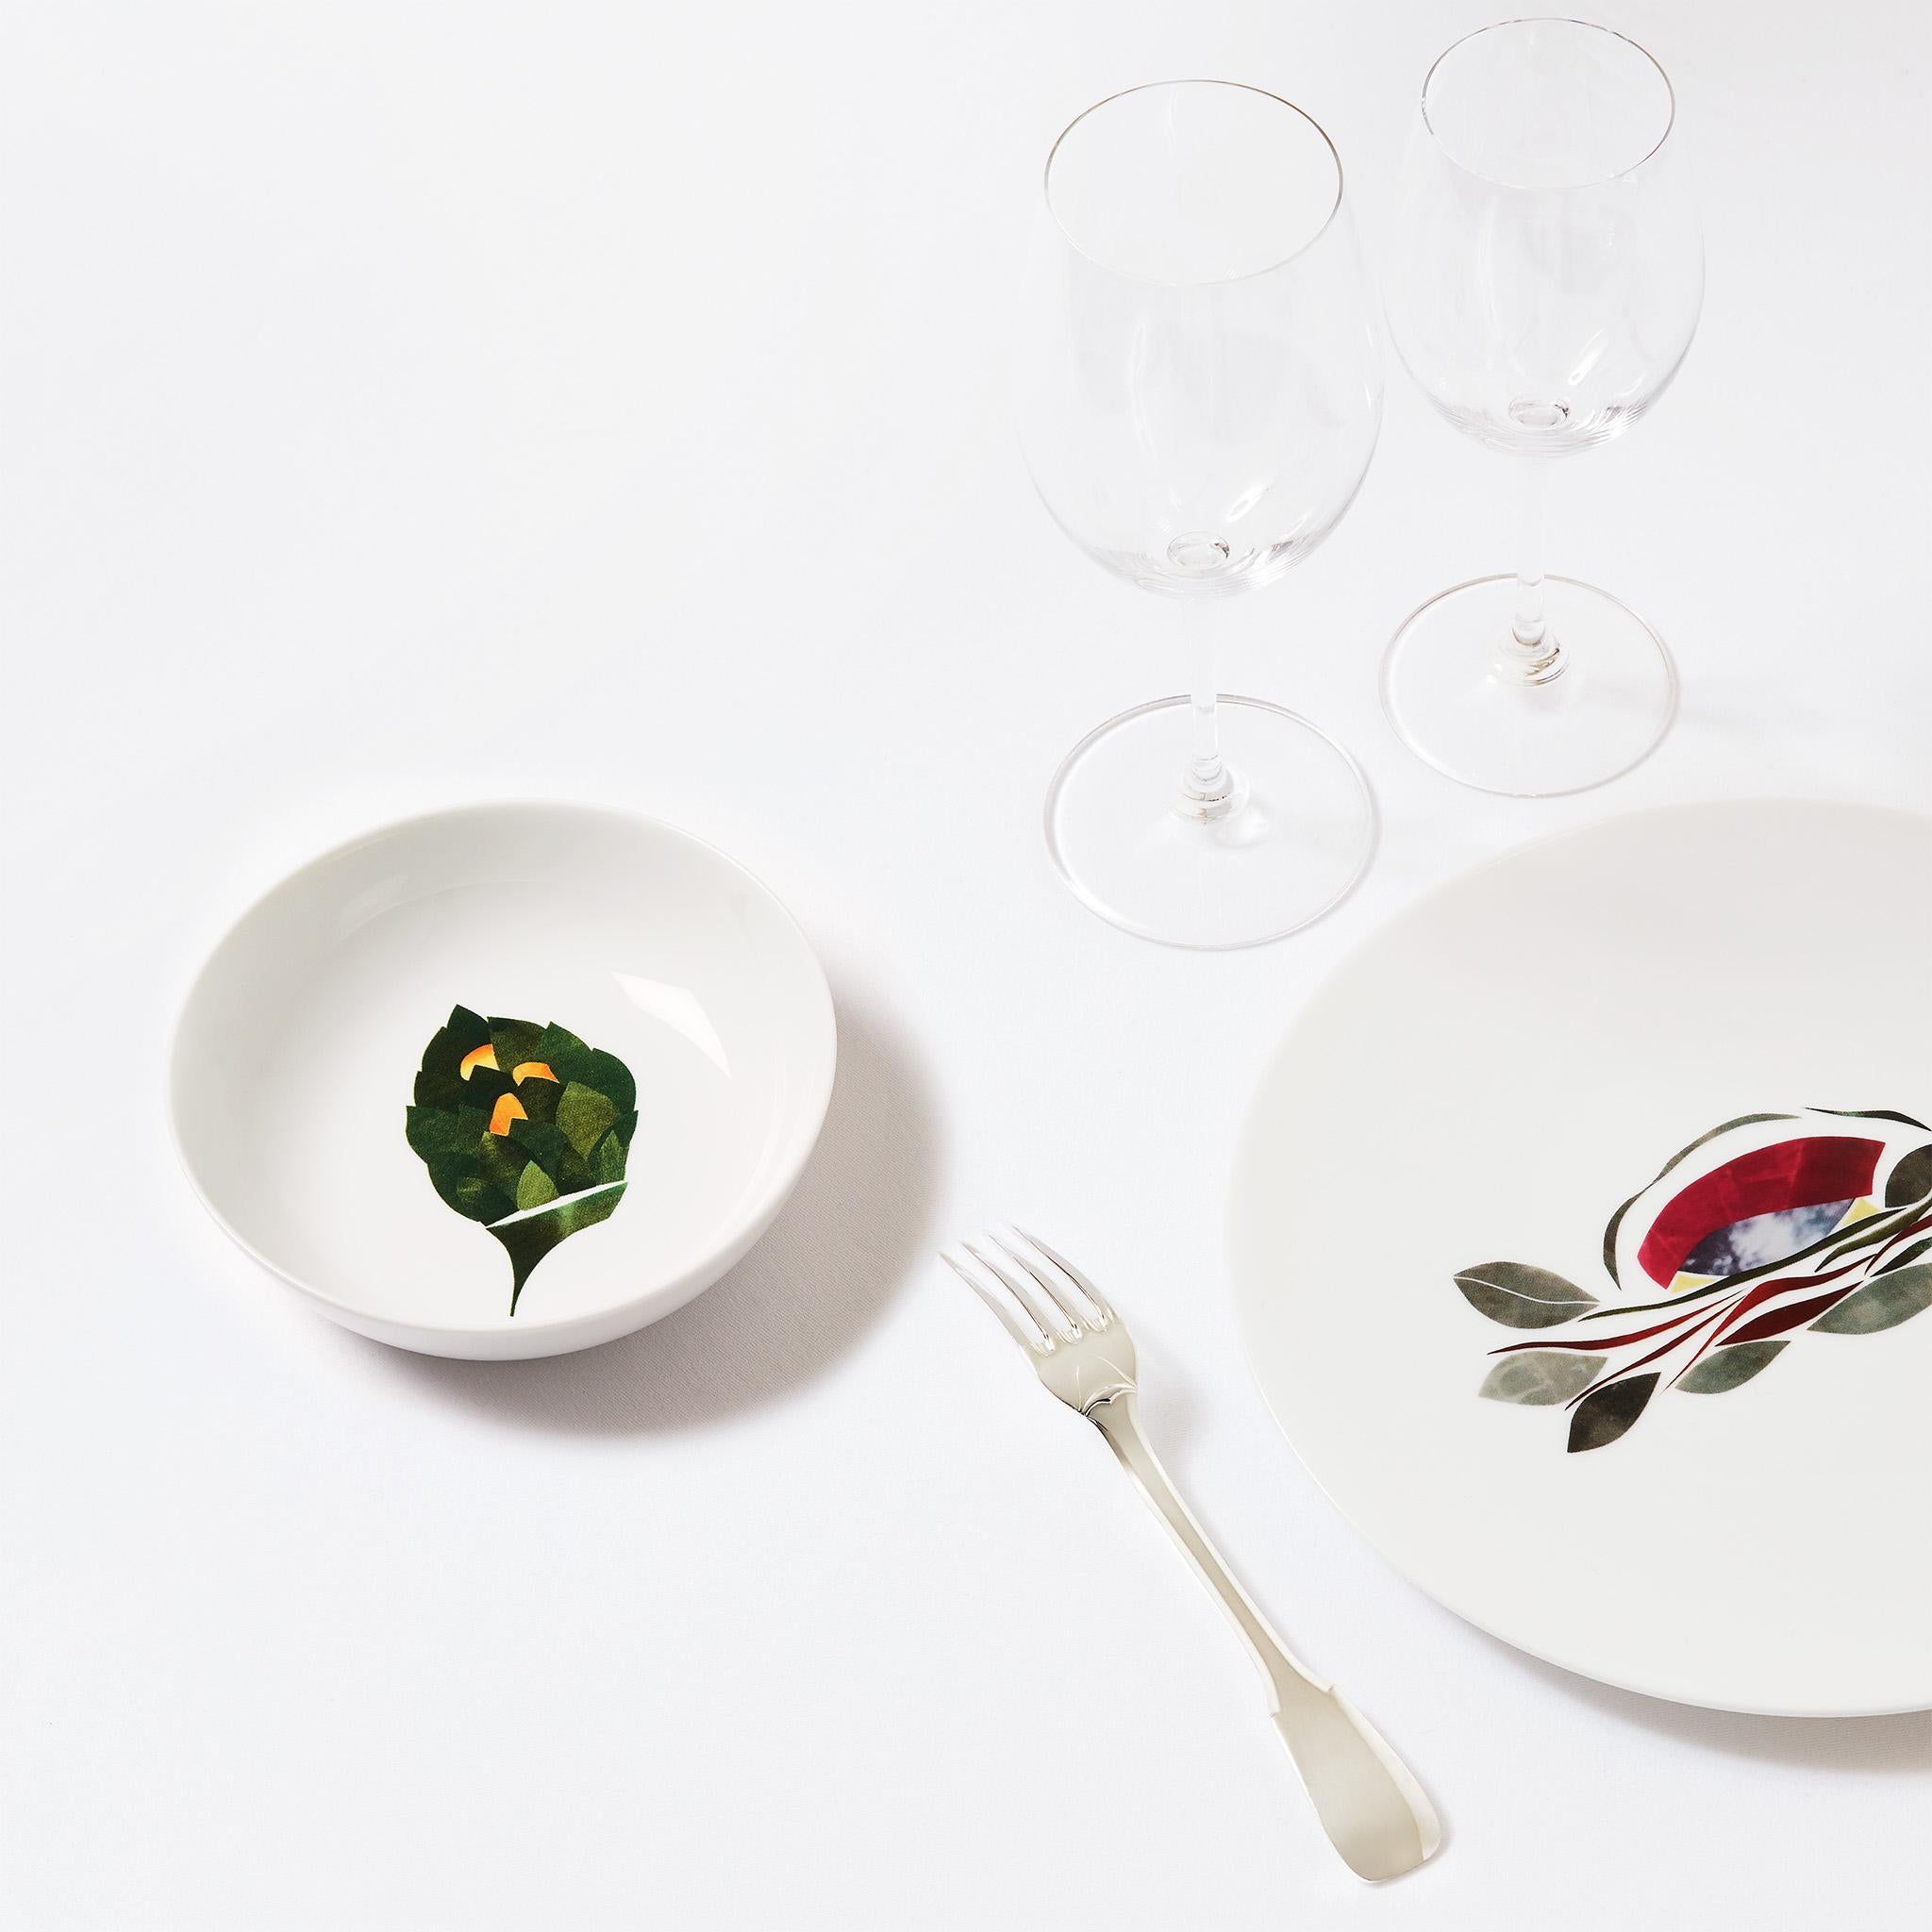 Silk-screened creation of the paper collages of the French Chef Alain Passard. A creation inspired by his recipe of artichoke with orange.
From mineral porcelain to vegetable recipes, this bowl is an Ode to Dame Nature.

Bowl that adapts to all